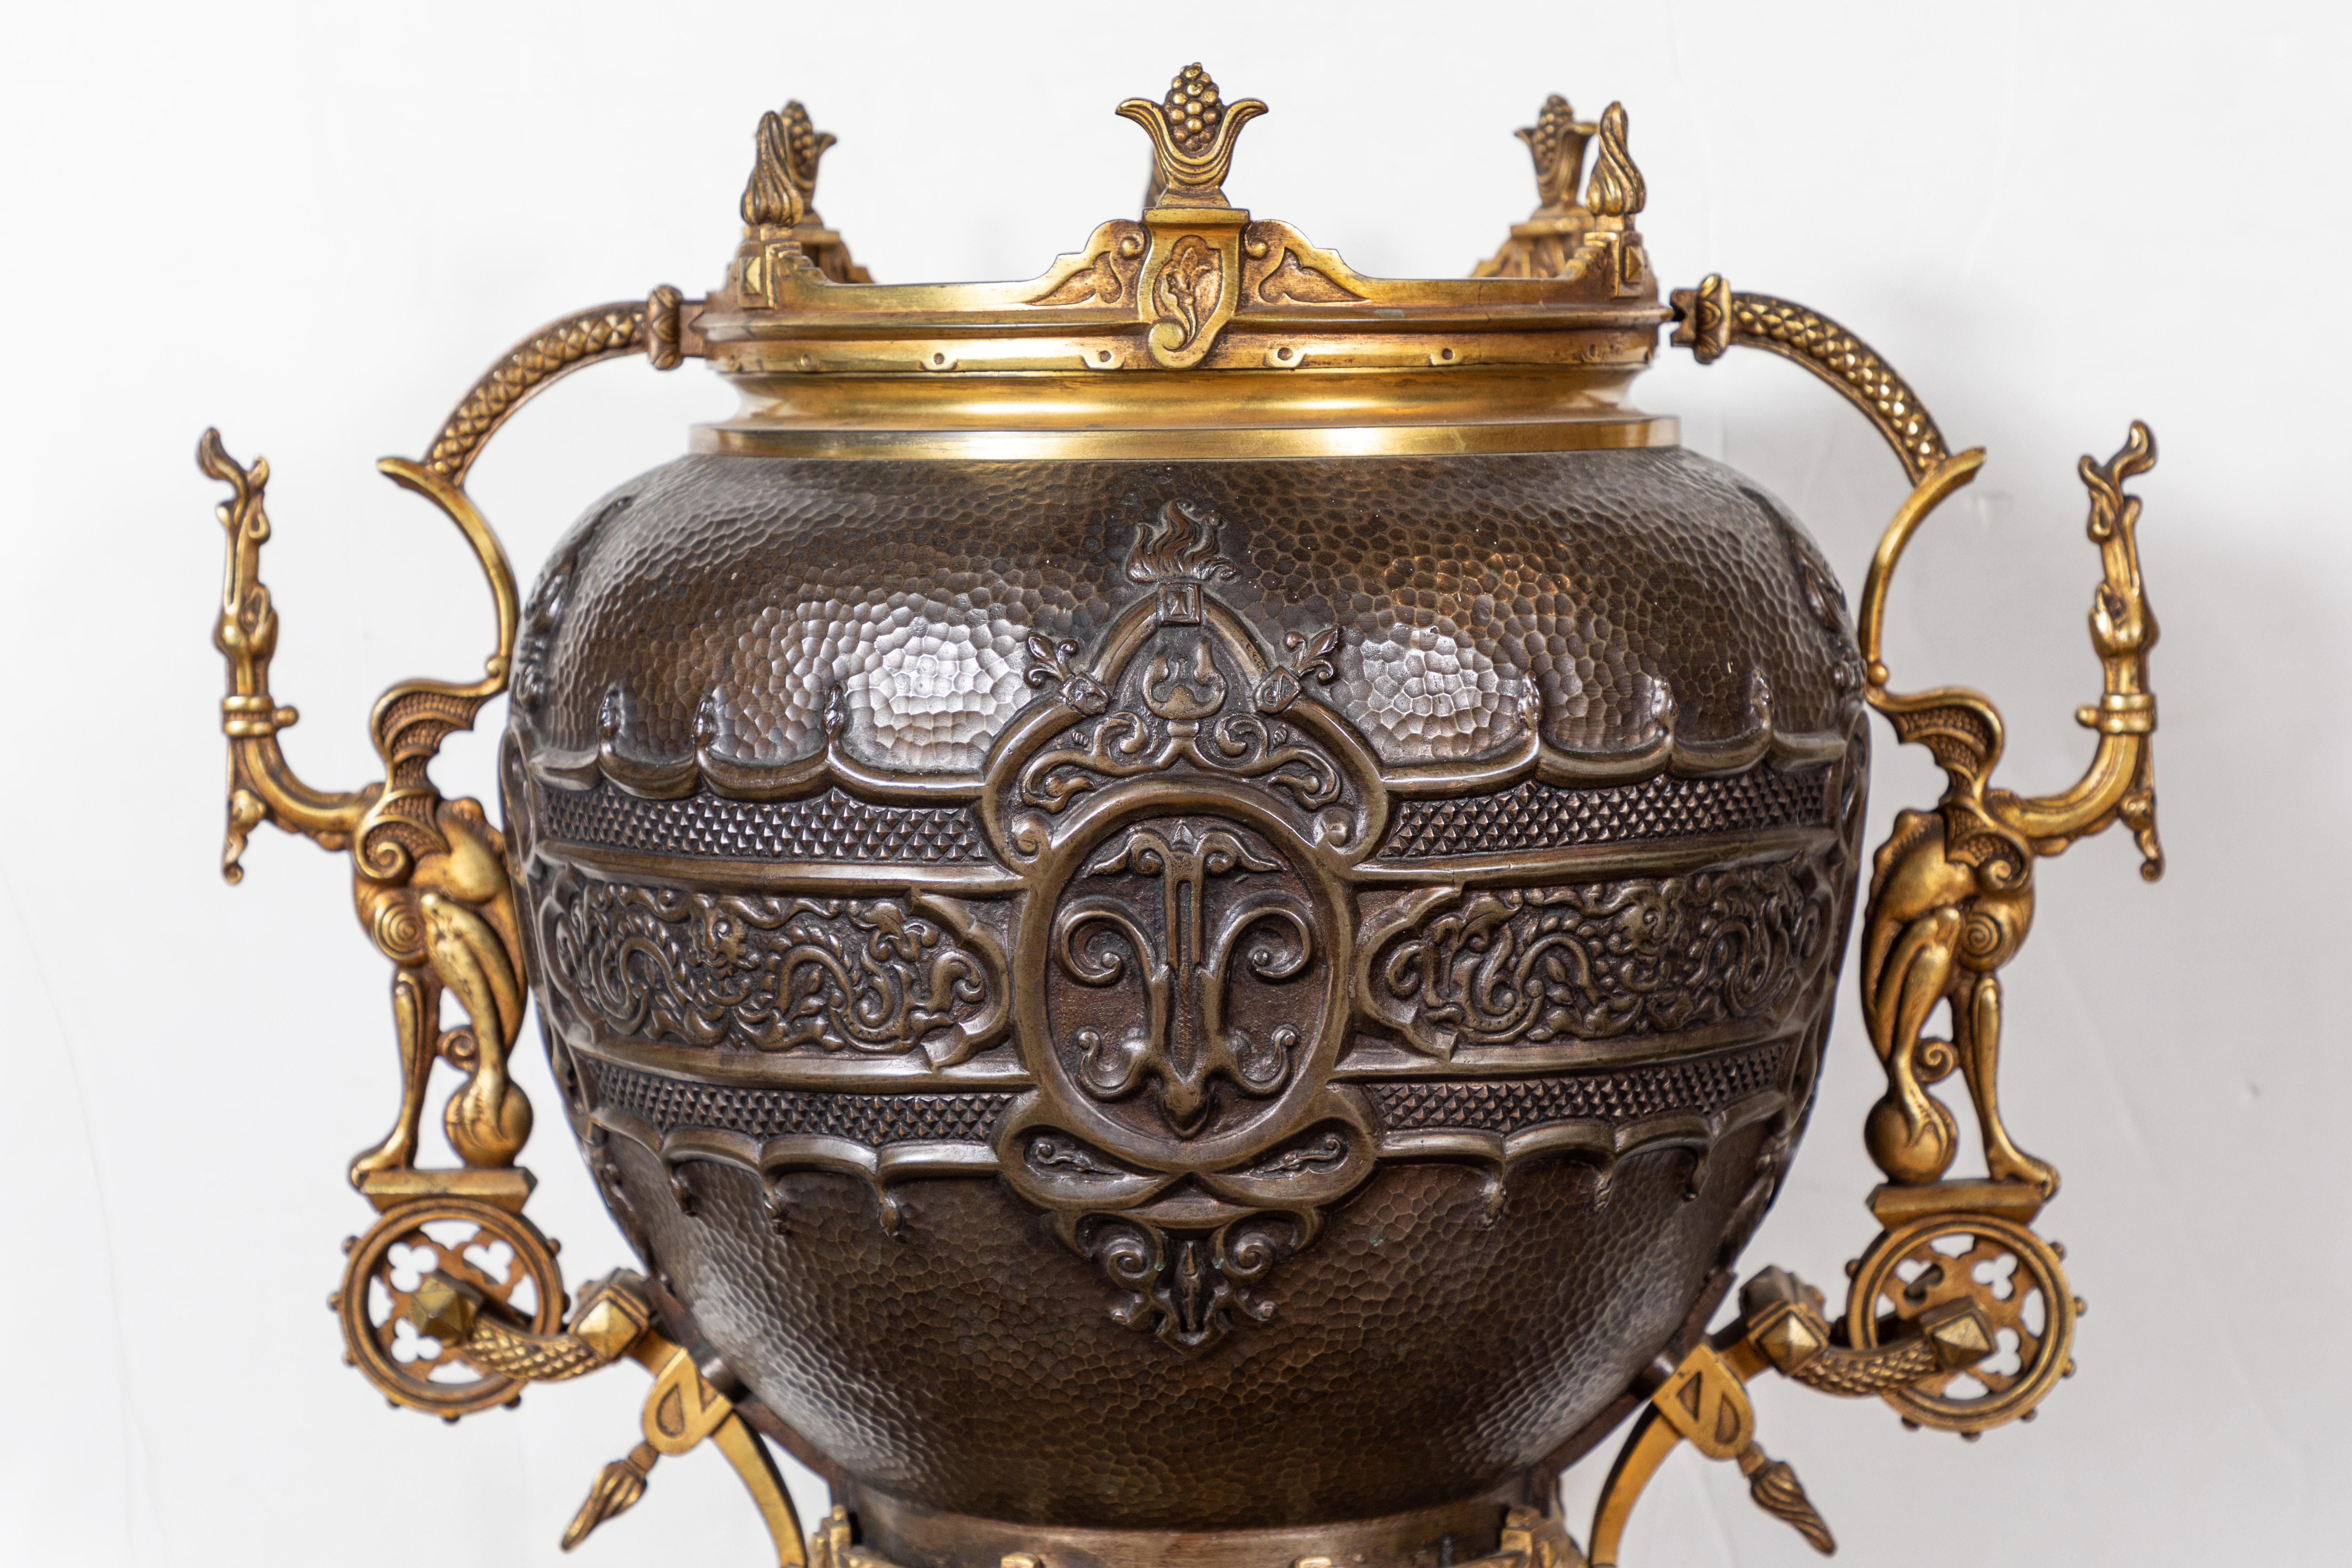 Remarkable, large, solid bronze and gilt bronze French planter on a stand. The central vessel in beautiful repoussé featuring a band of dragon forms. The entirety of the gilt bronze Stand featuring an elaborate array of finials, pierced handles and